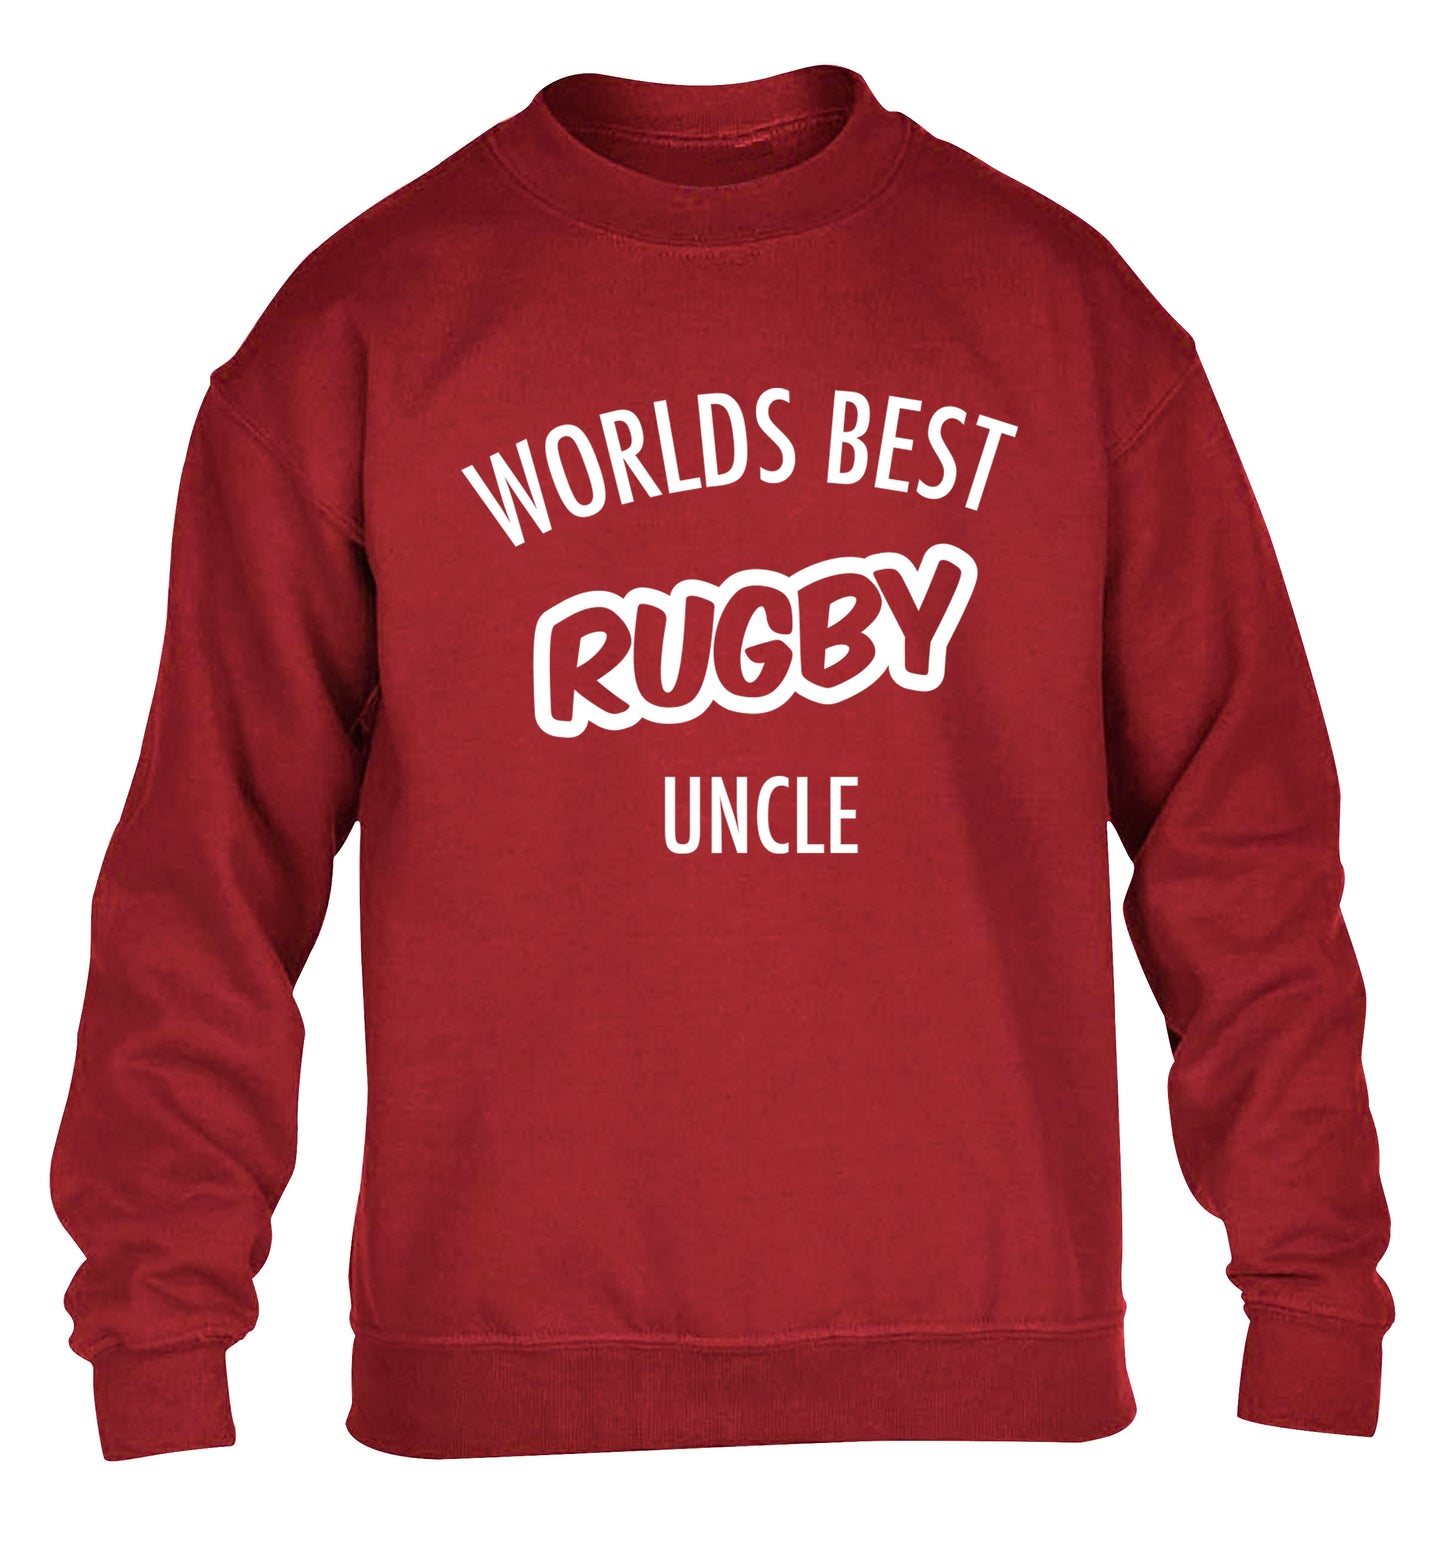 Worlds best rugby uncle children's grey sweater 12-13 Years